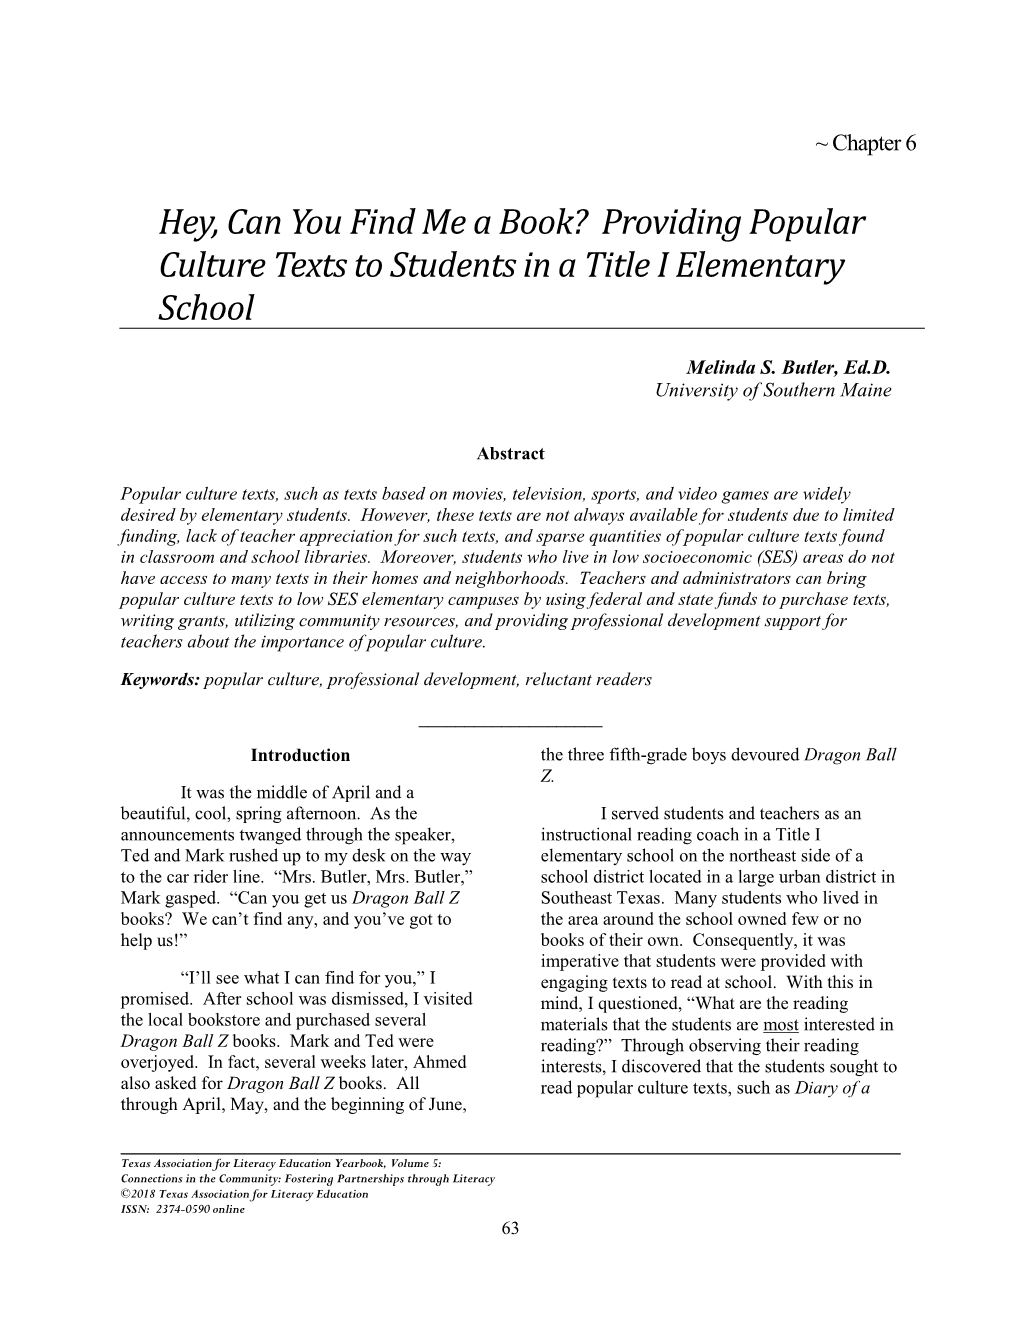 Providing Popular Culture Texts to Students in a Title I Elementary School